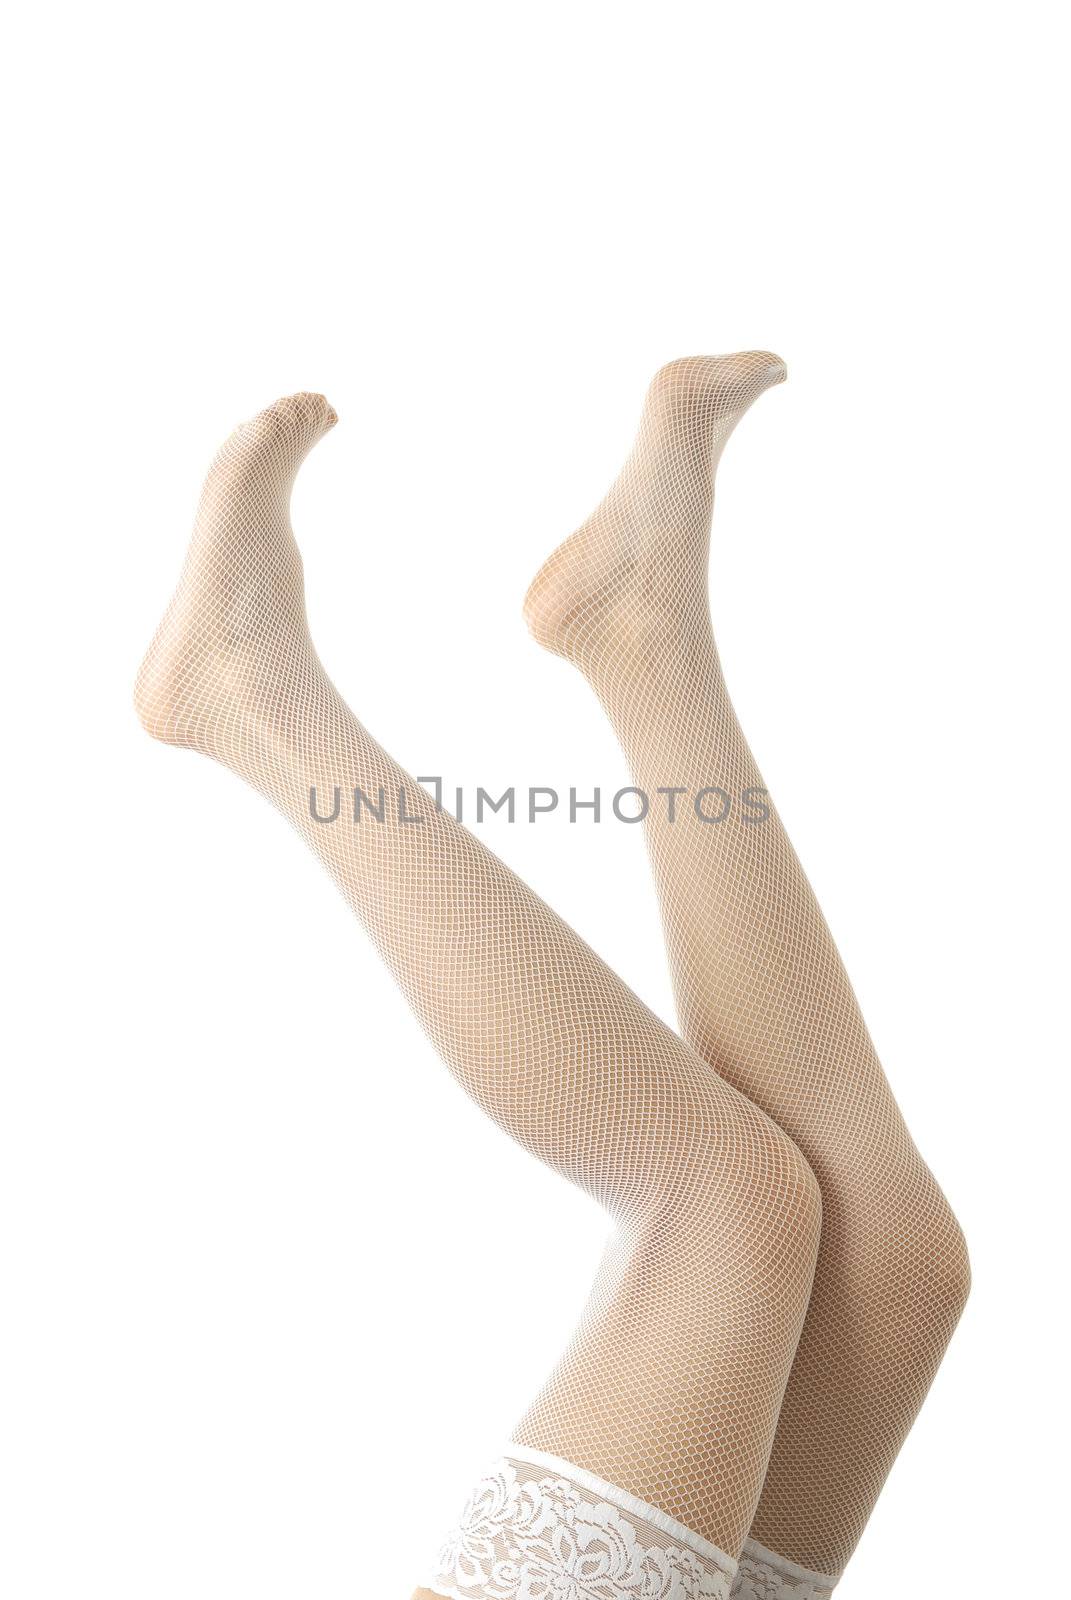 Woman legs in white stocking on a white background